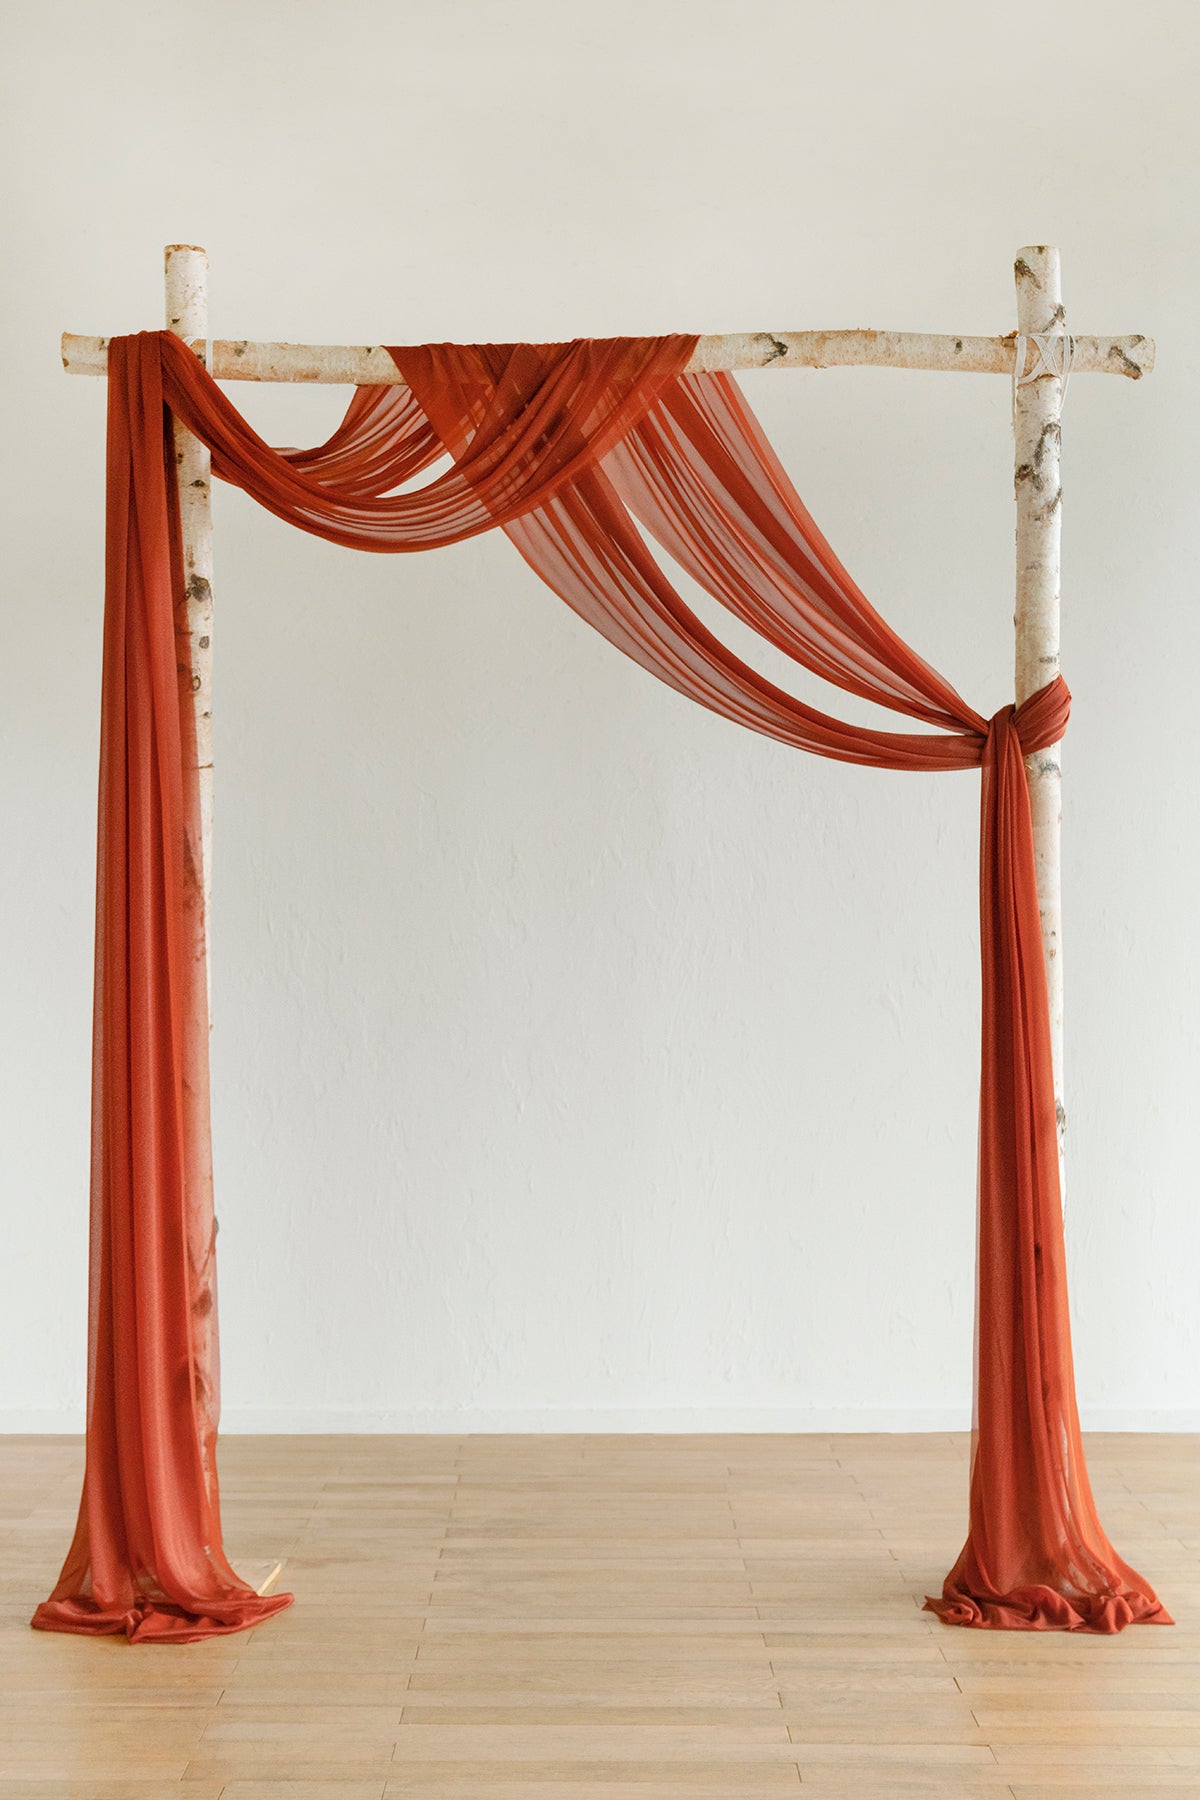 Wedding Arch Draping Fabric Clearance – Ling's Moment